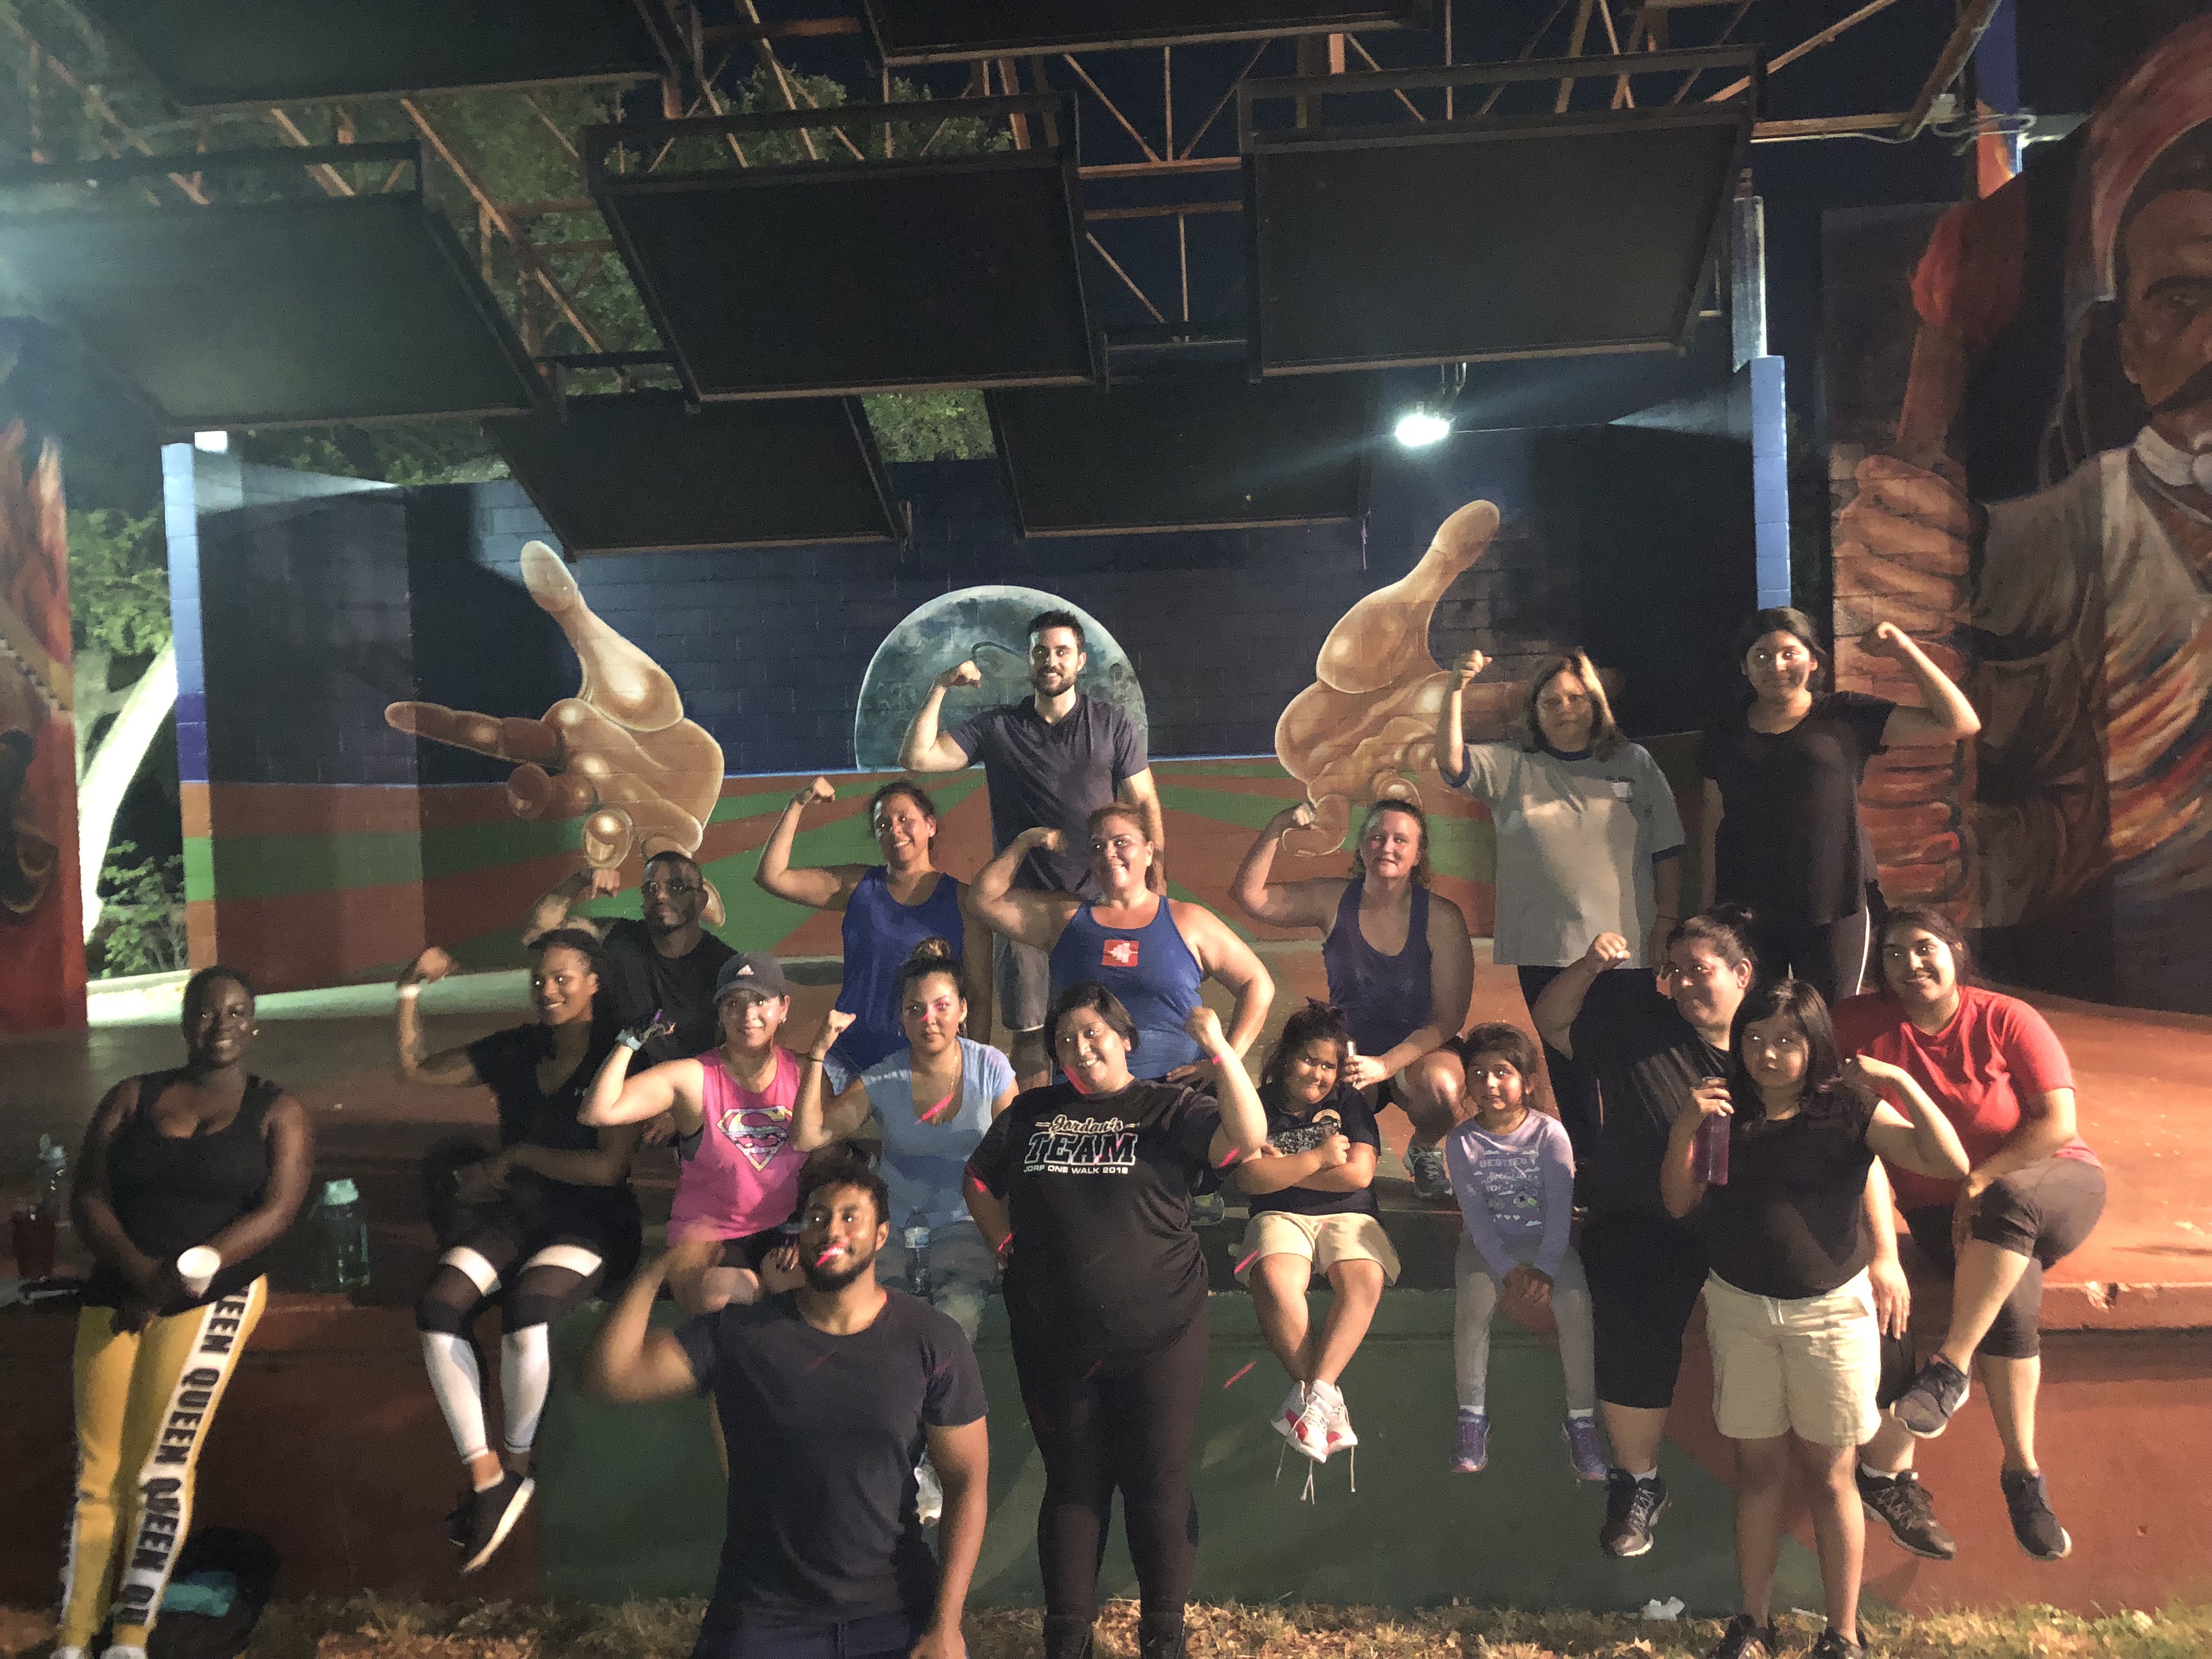 A group of men and women in workout gear pose in front of a mural after having participated in an east Austin Boot Camp class.